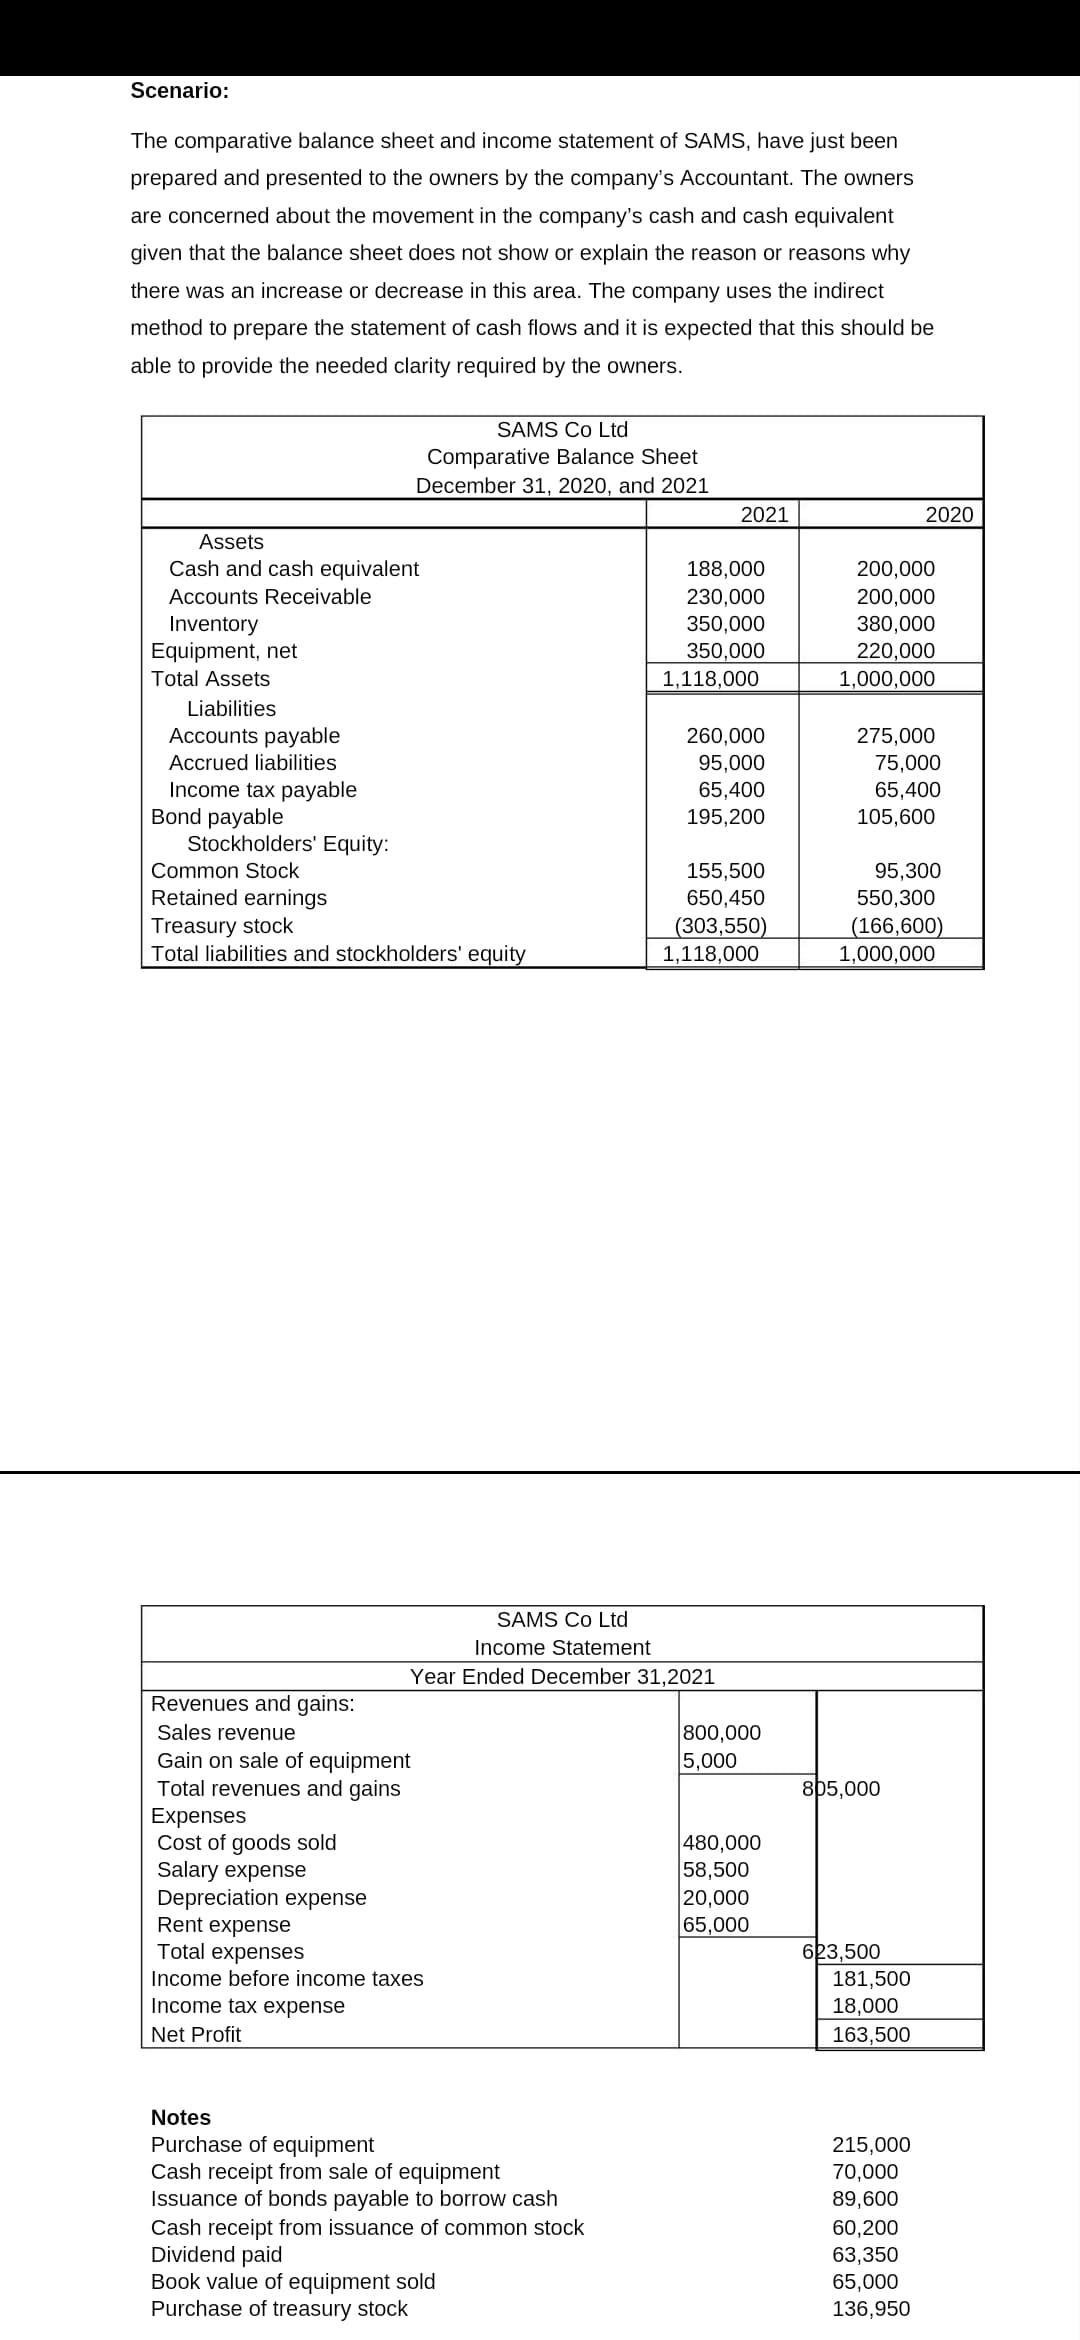 Scenario:
The comparative balance sheet and income statement of SAMS, have just been
prepared and presented to the owners by the company's Accountant. The owners
are concerned about the movement in the company's cash and cash equivalent
given that the balance sheet does not show or explain the reason or reasons why
there was an increase or decrease in this area. The company uses the indirect
method to prepare the statement of cash flows and it is expected that this should be
able to provide the needed clarity required by the owners.
Assets
Cash and cash equivalent
Accounts Receivable
Inventory
Equipment, net
Total Assets
Liabilities
Accounts payable
Accrued liabilities
Income tax payable
Bond payable
Stockholders' Equity:
SAMS Co Ltd
Comparative Balance Sheet
December 31, 2020, and 2021
Common Stock
Retained earnings
Treasury stock
Total liabilities and stockholders' equity
Revenues and gains:
Sales revenue
Gain on sale of equipment
Total revenues and gains
Expenses
Cost of goods sold
Salary expense
Depreciation expense
Rent expense
Total expenses
Income before income taxes
Income tax expense
Net Profit
Notes
Purchase of equipment
Cash receipt from sale of equipment
Issuance of bonds payable to borrow cash
Cash receipt from issuance of common stock
Dividend paid
Book value of equipment sold
Purchase of treasury stock
2021
188,000
230,000
350,000
350,000
1,118,000
SAMS Co Ltd
Income Statement
Year Ended December 31,2021
260,000
95,000
65,400
195,200
155,500
650,450
(303,550)
1,118,000
800,000
5,000
480,000
58,500
20,000
65,000
200,000
200,000
380,000
220,000
1,000,000
275,000
75,000
65,400
105,600
95,300
550,300
(166,600)
1,000,000
805,000
2020
623,500
181,500
18,000
163,500
215,000
70,000
89,600
60,200
63,350
65,000
136,950